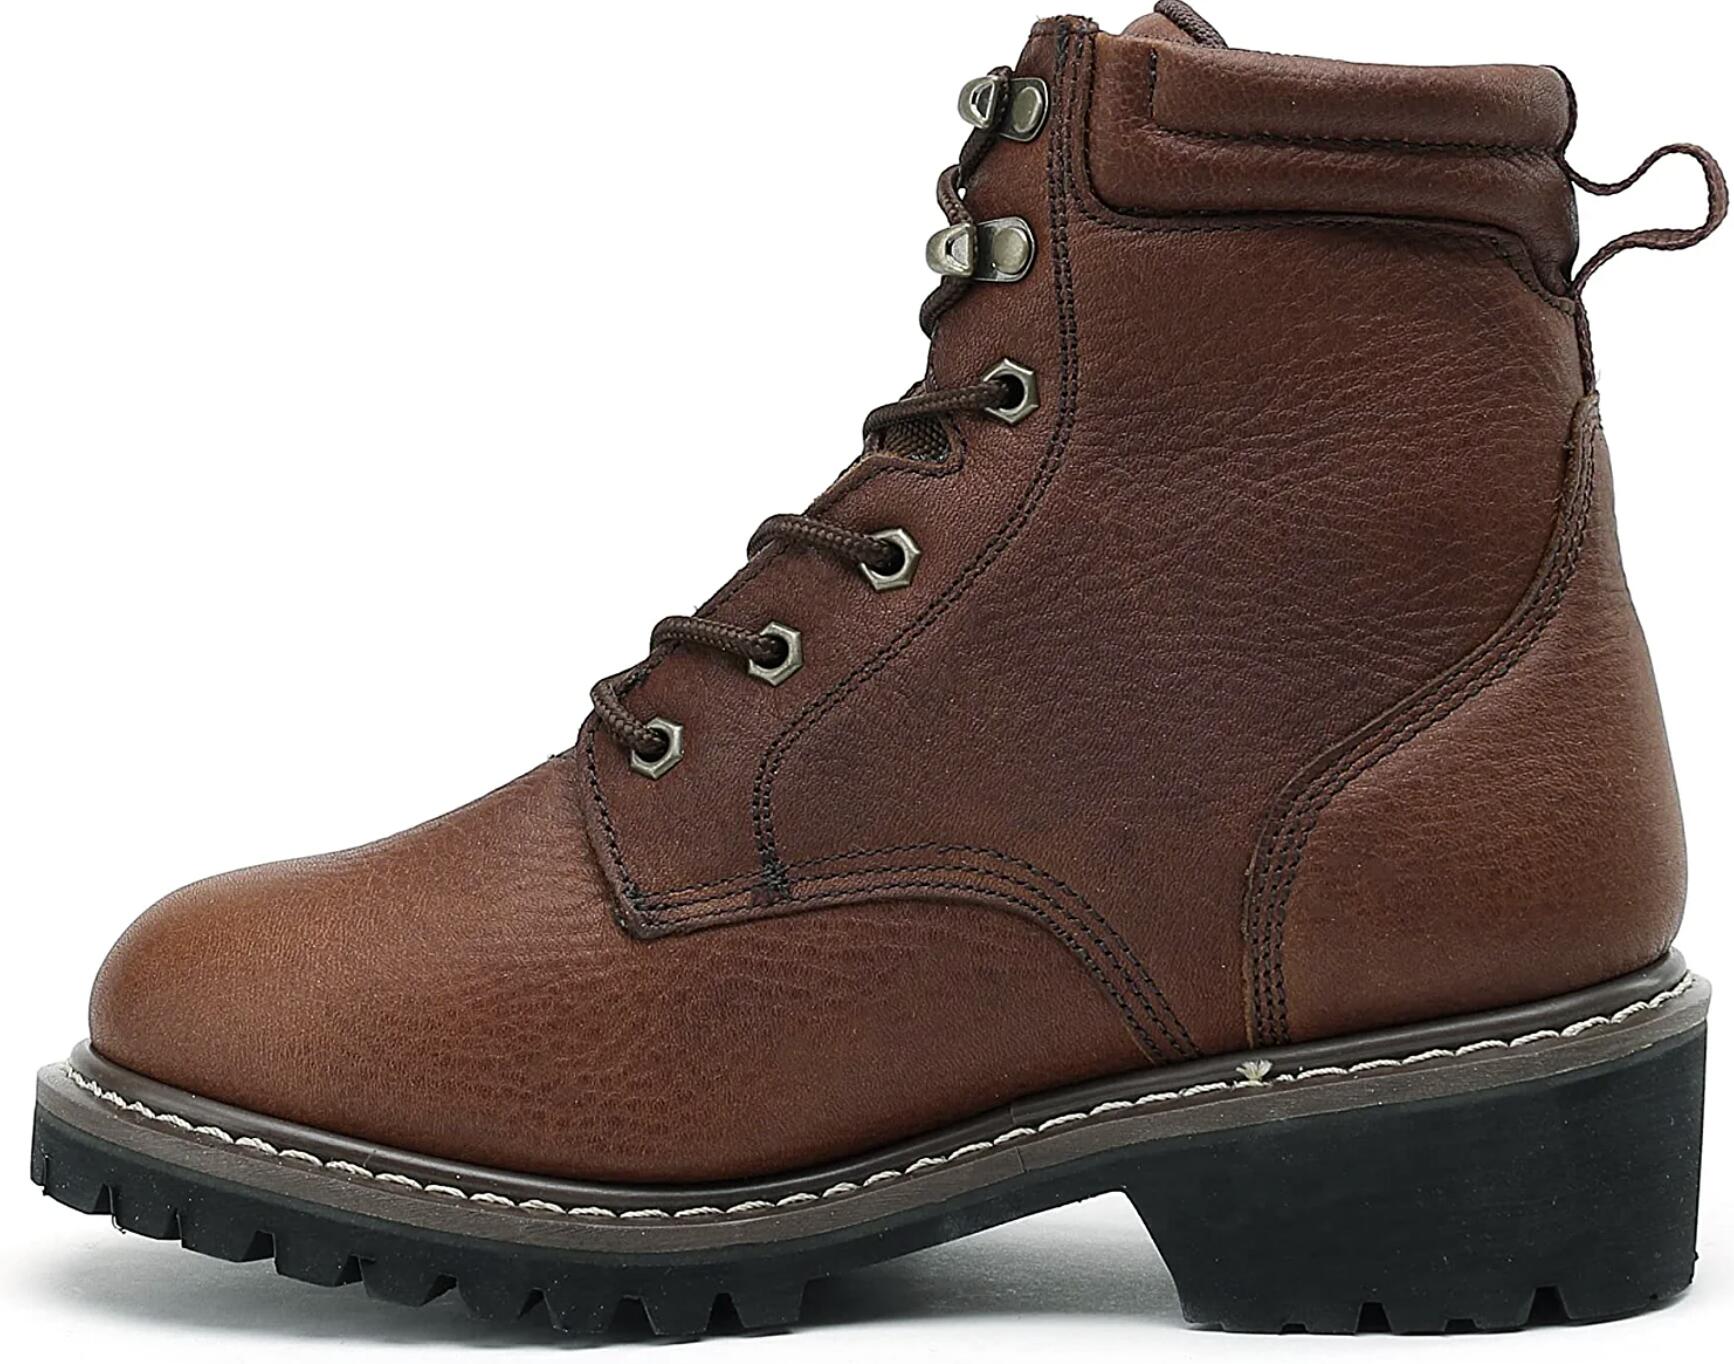 Insulated Work Boots for Men: A Guide to Brunt Options